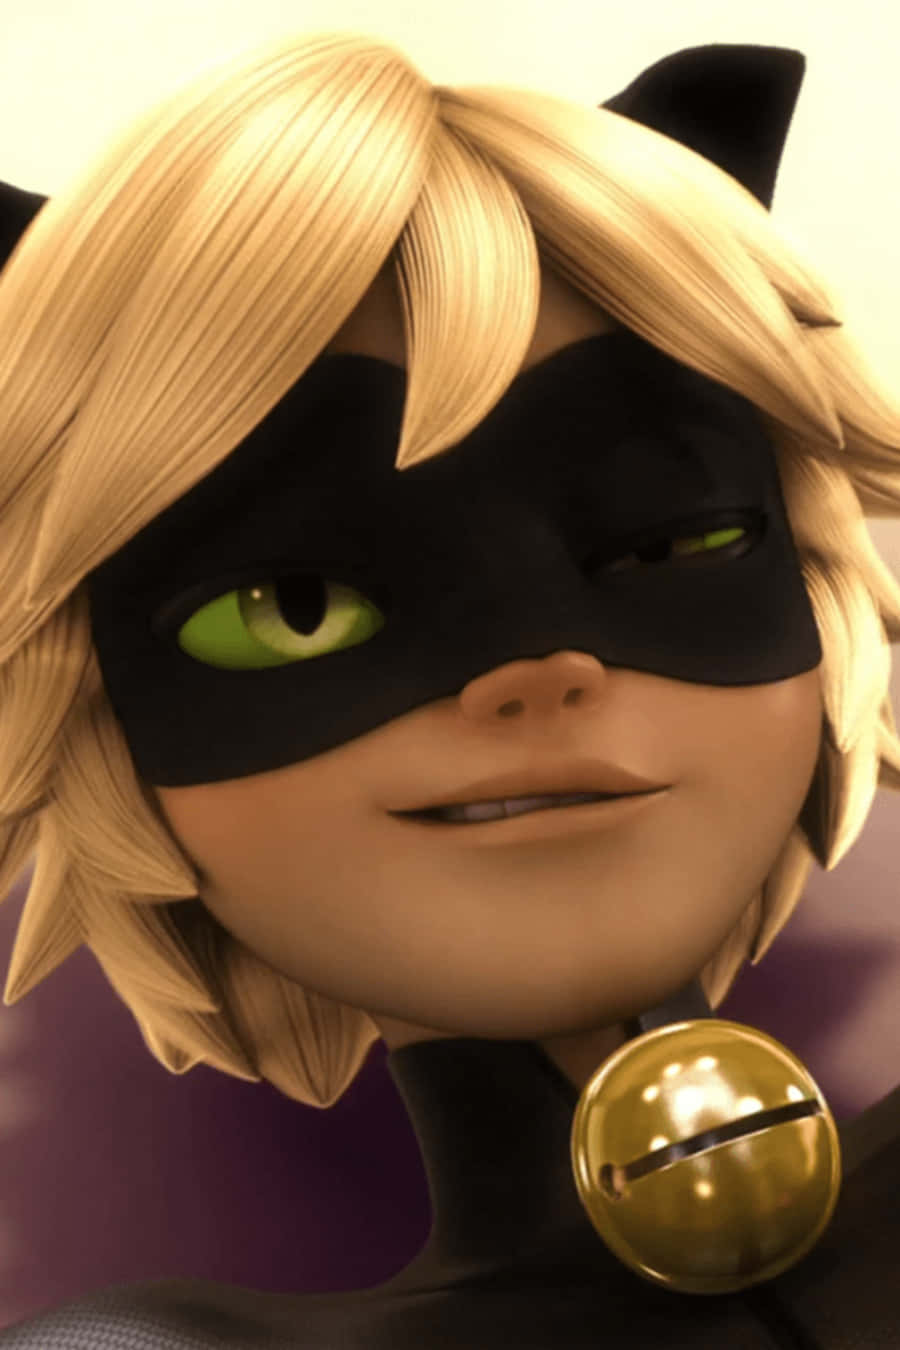 “Cat Noir: Staring At You With Stealth, Mystery and Mystery”